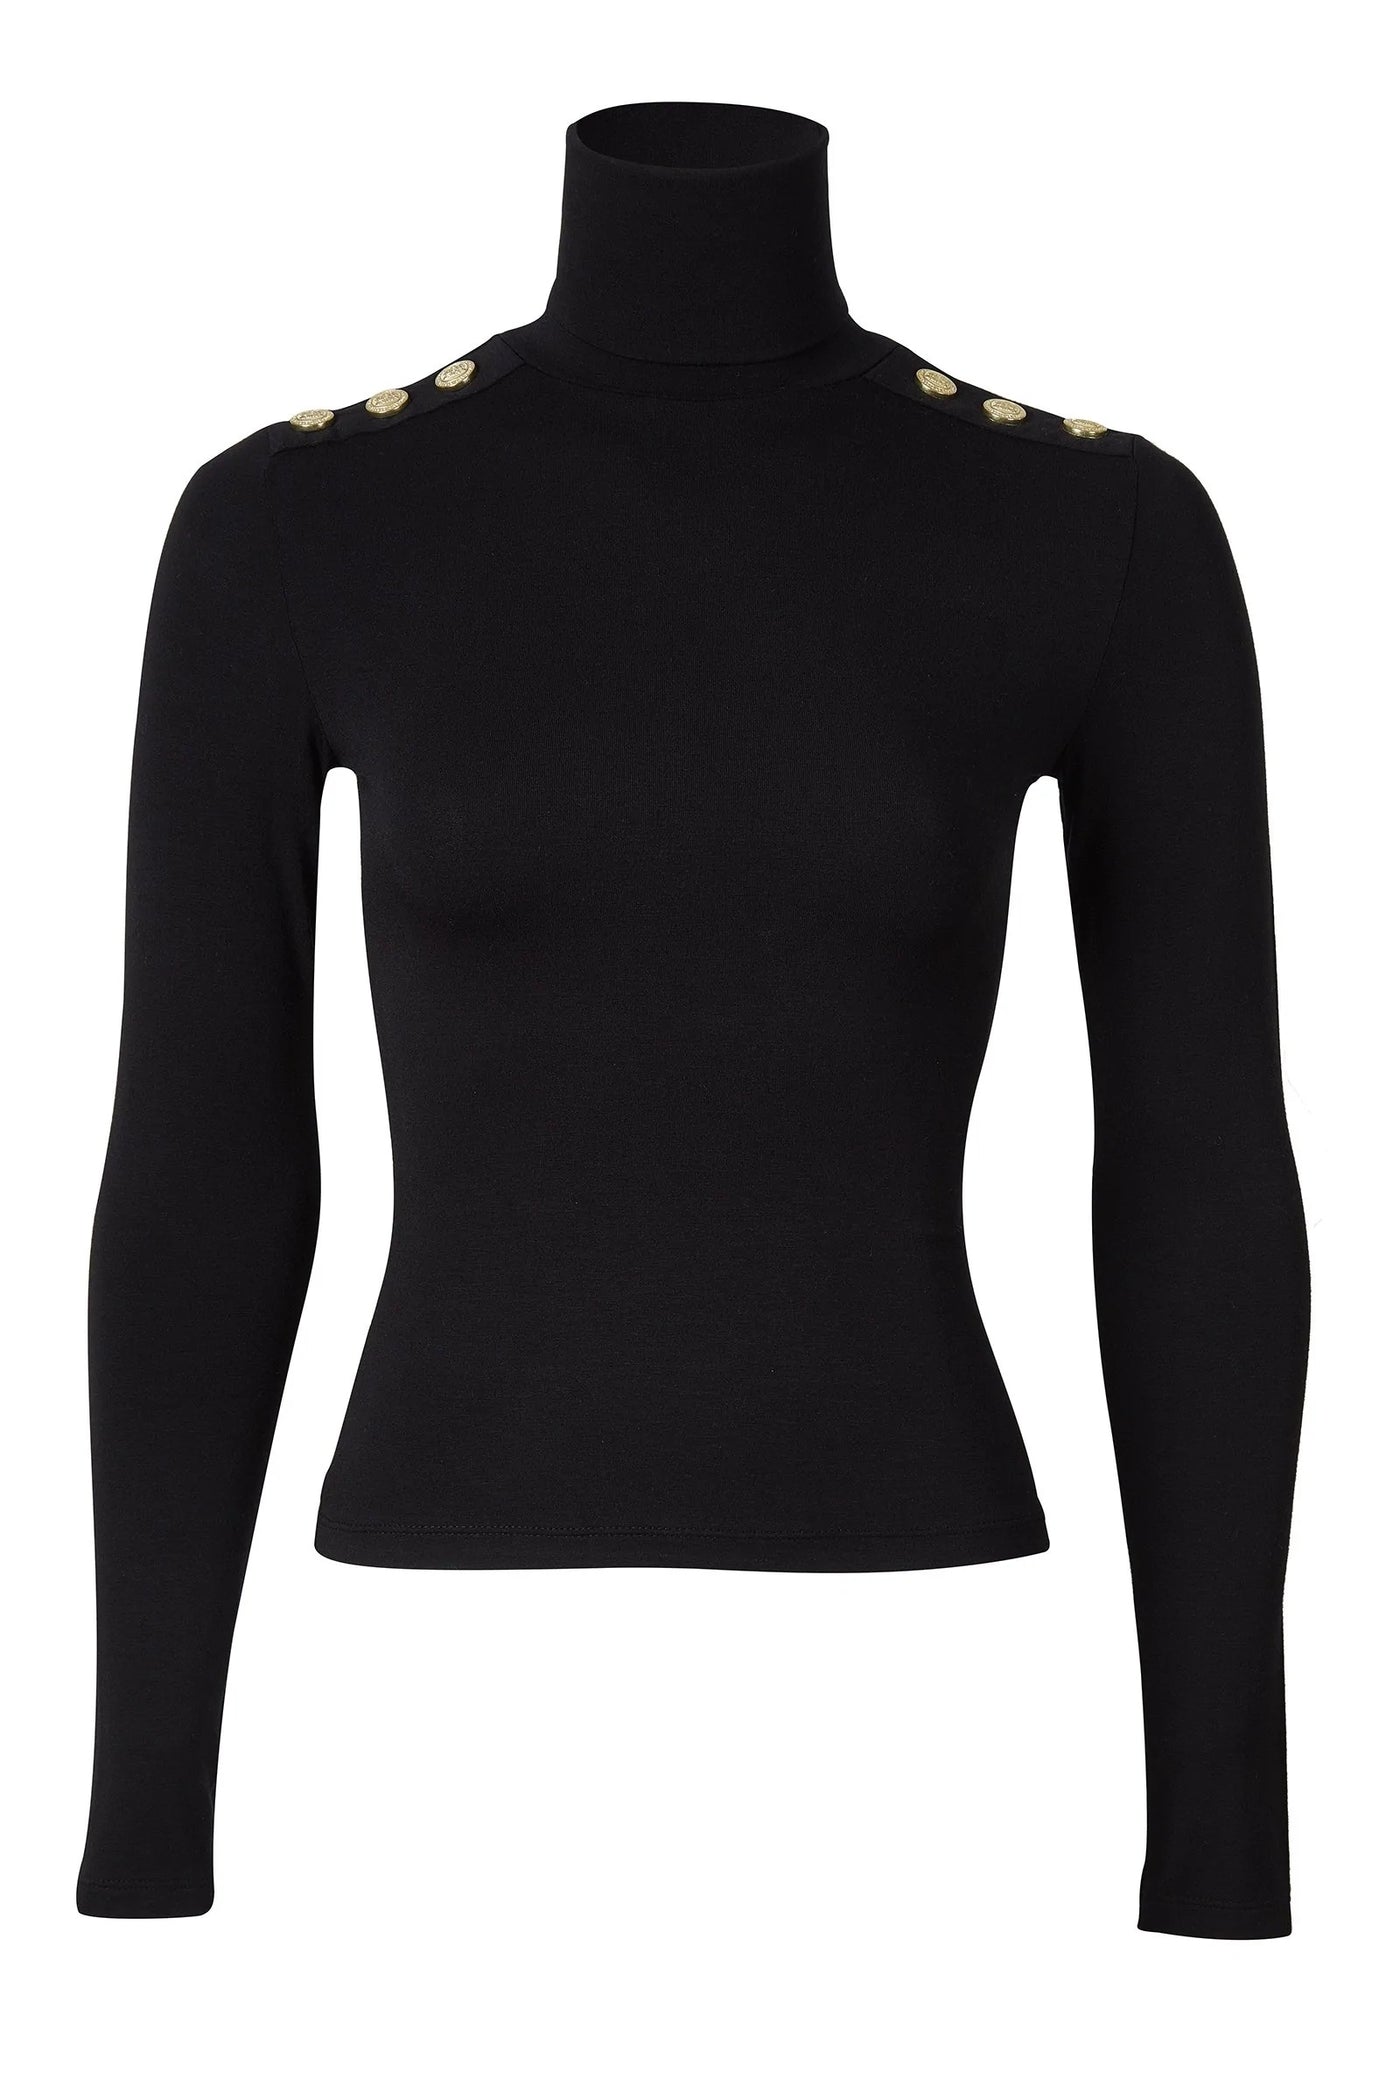 Holland Cooper Long Sleeve Roll Neck T Shirt in Black